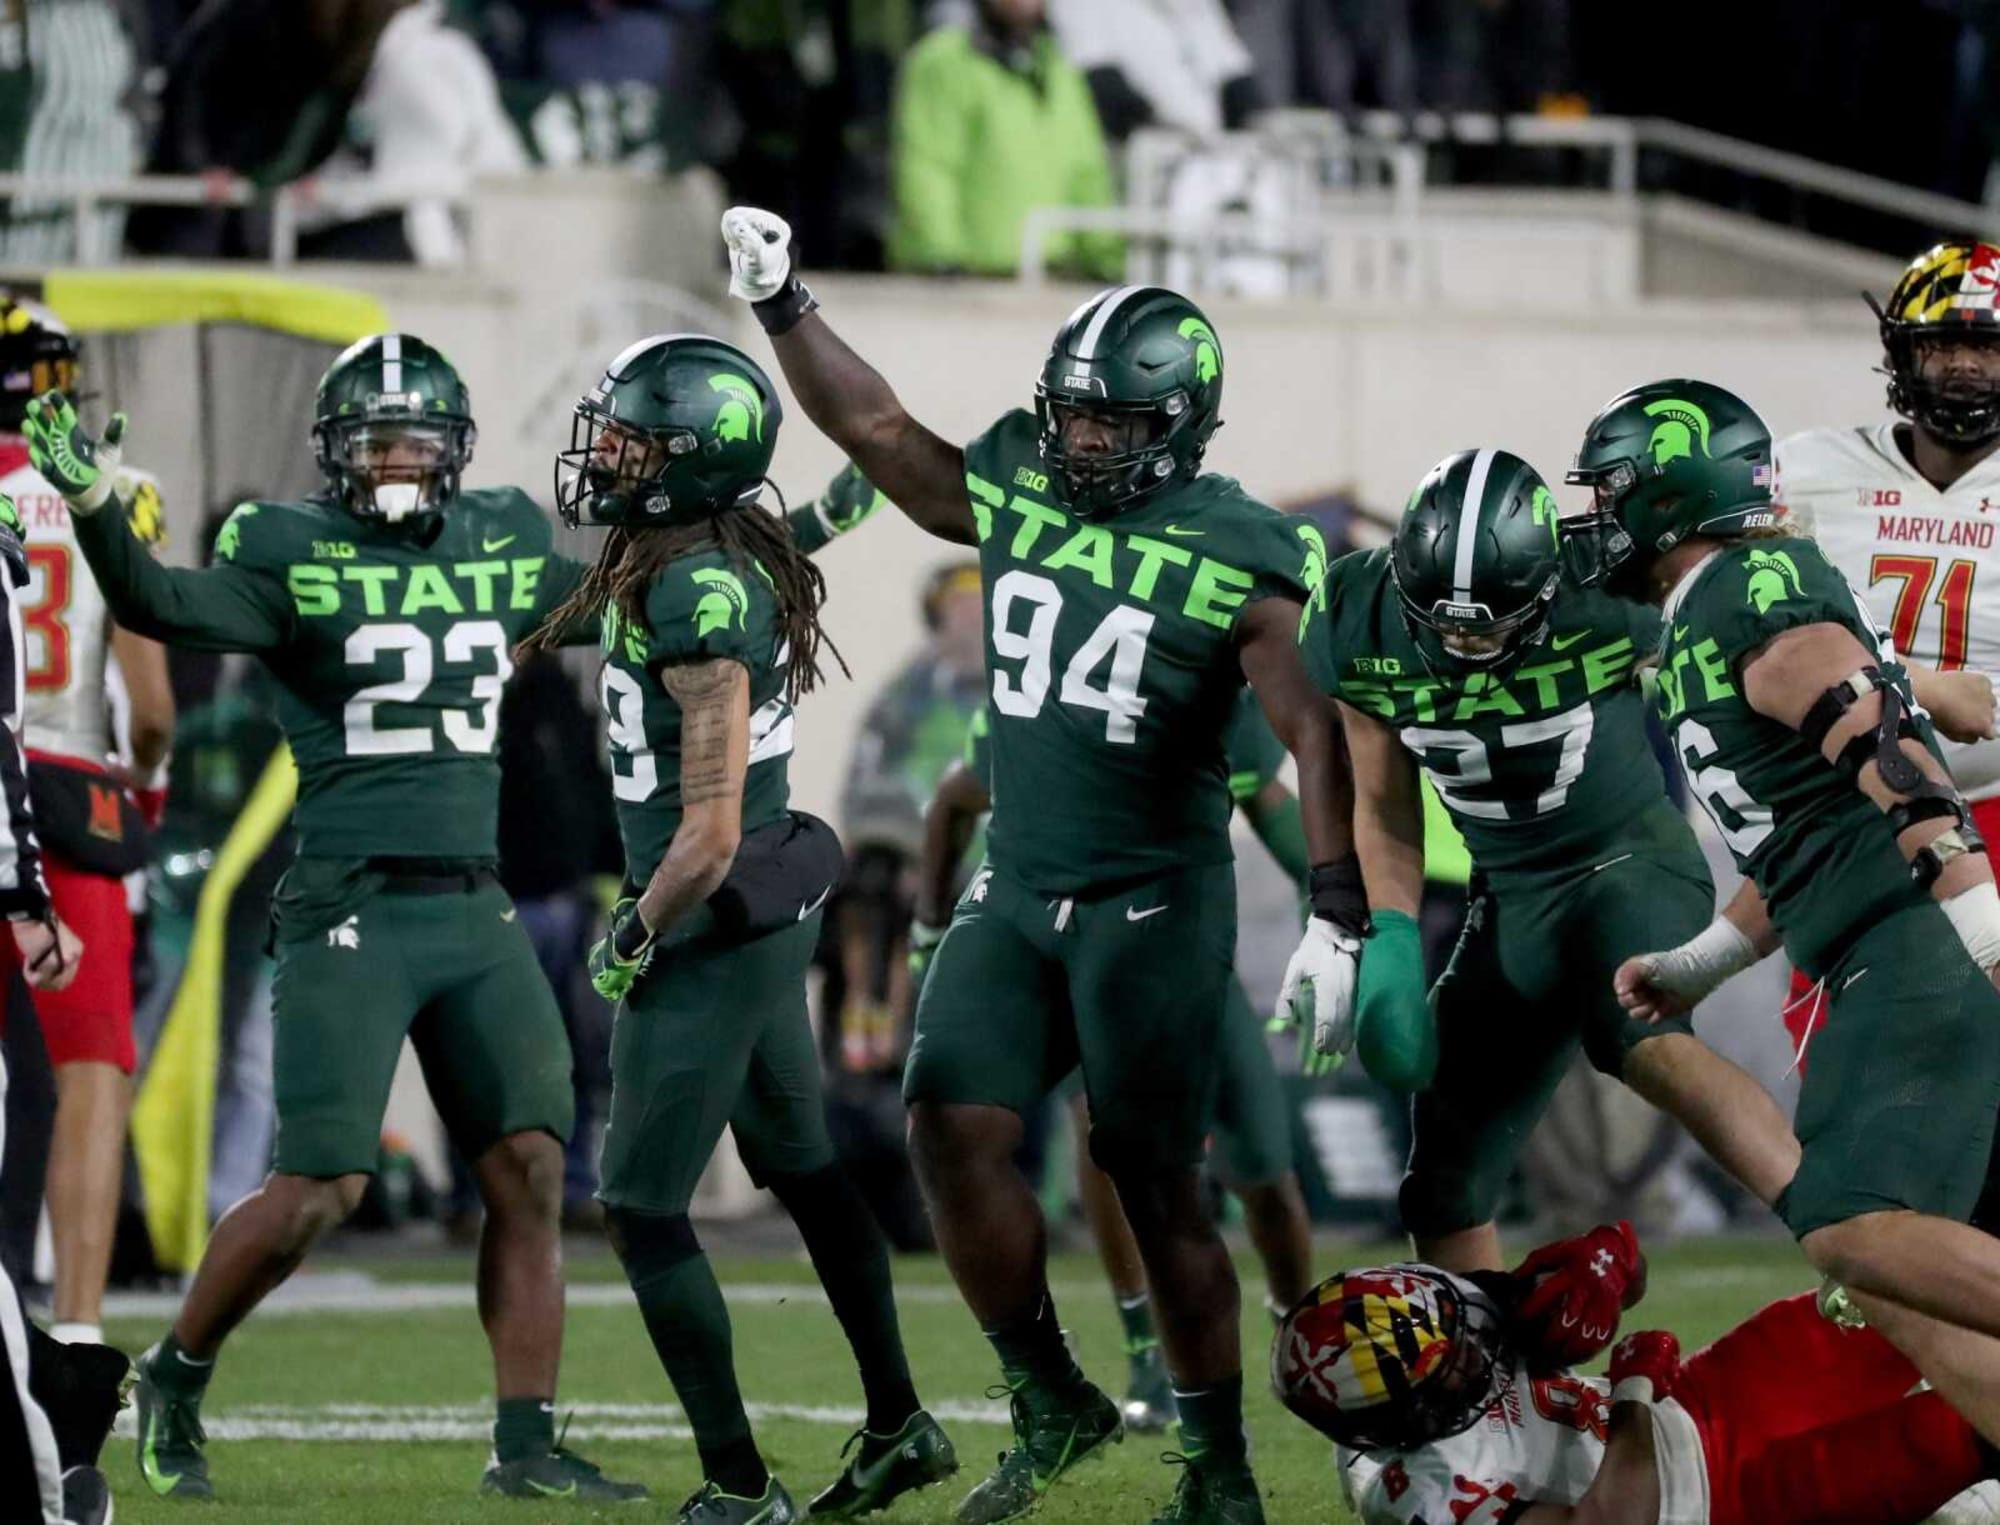 Michigan State Football 3 takeaways from blowout win over Maryland